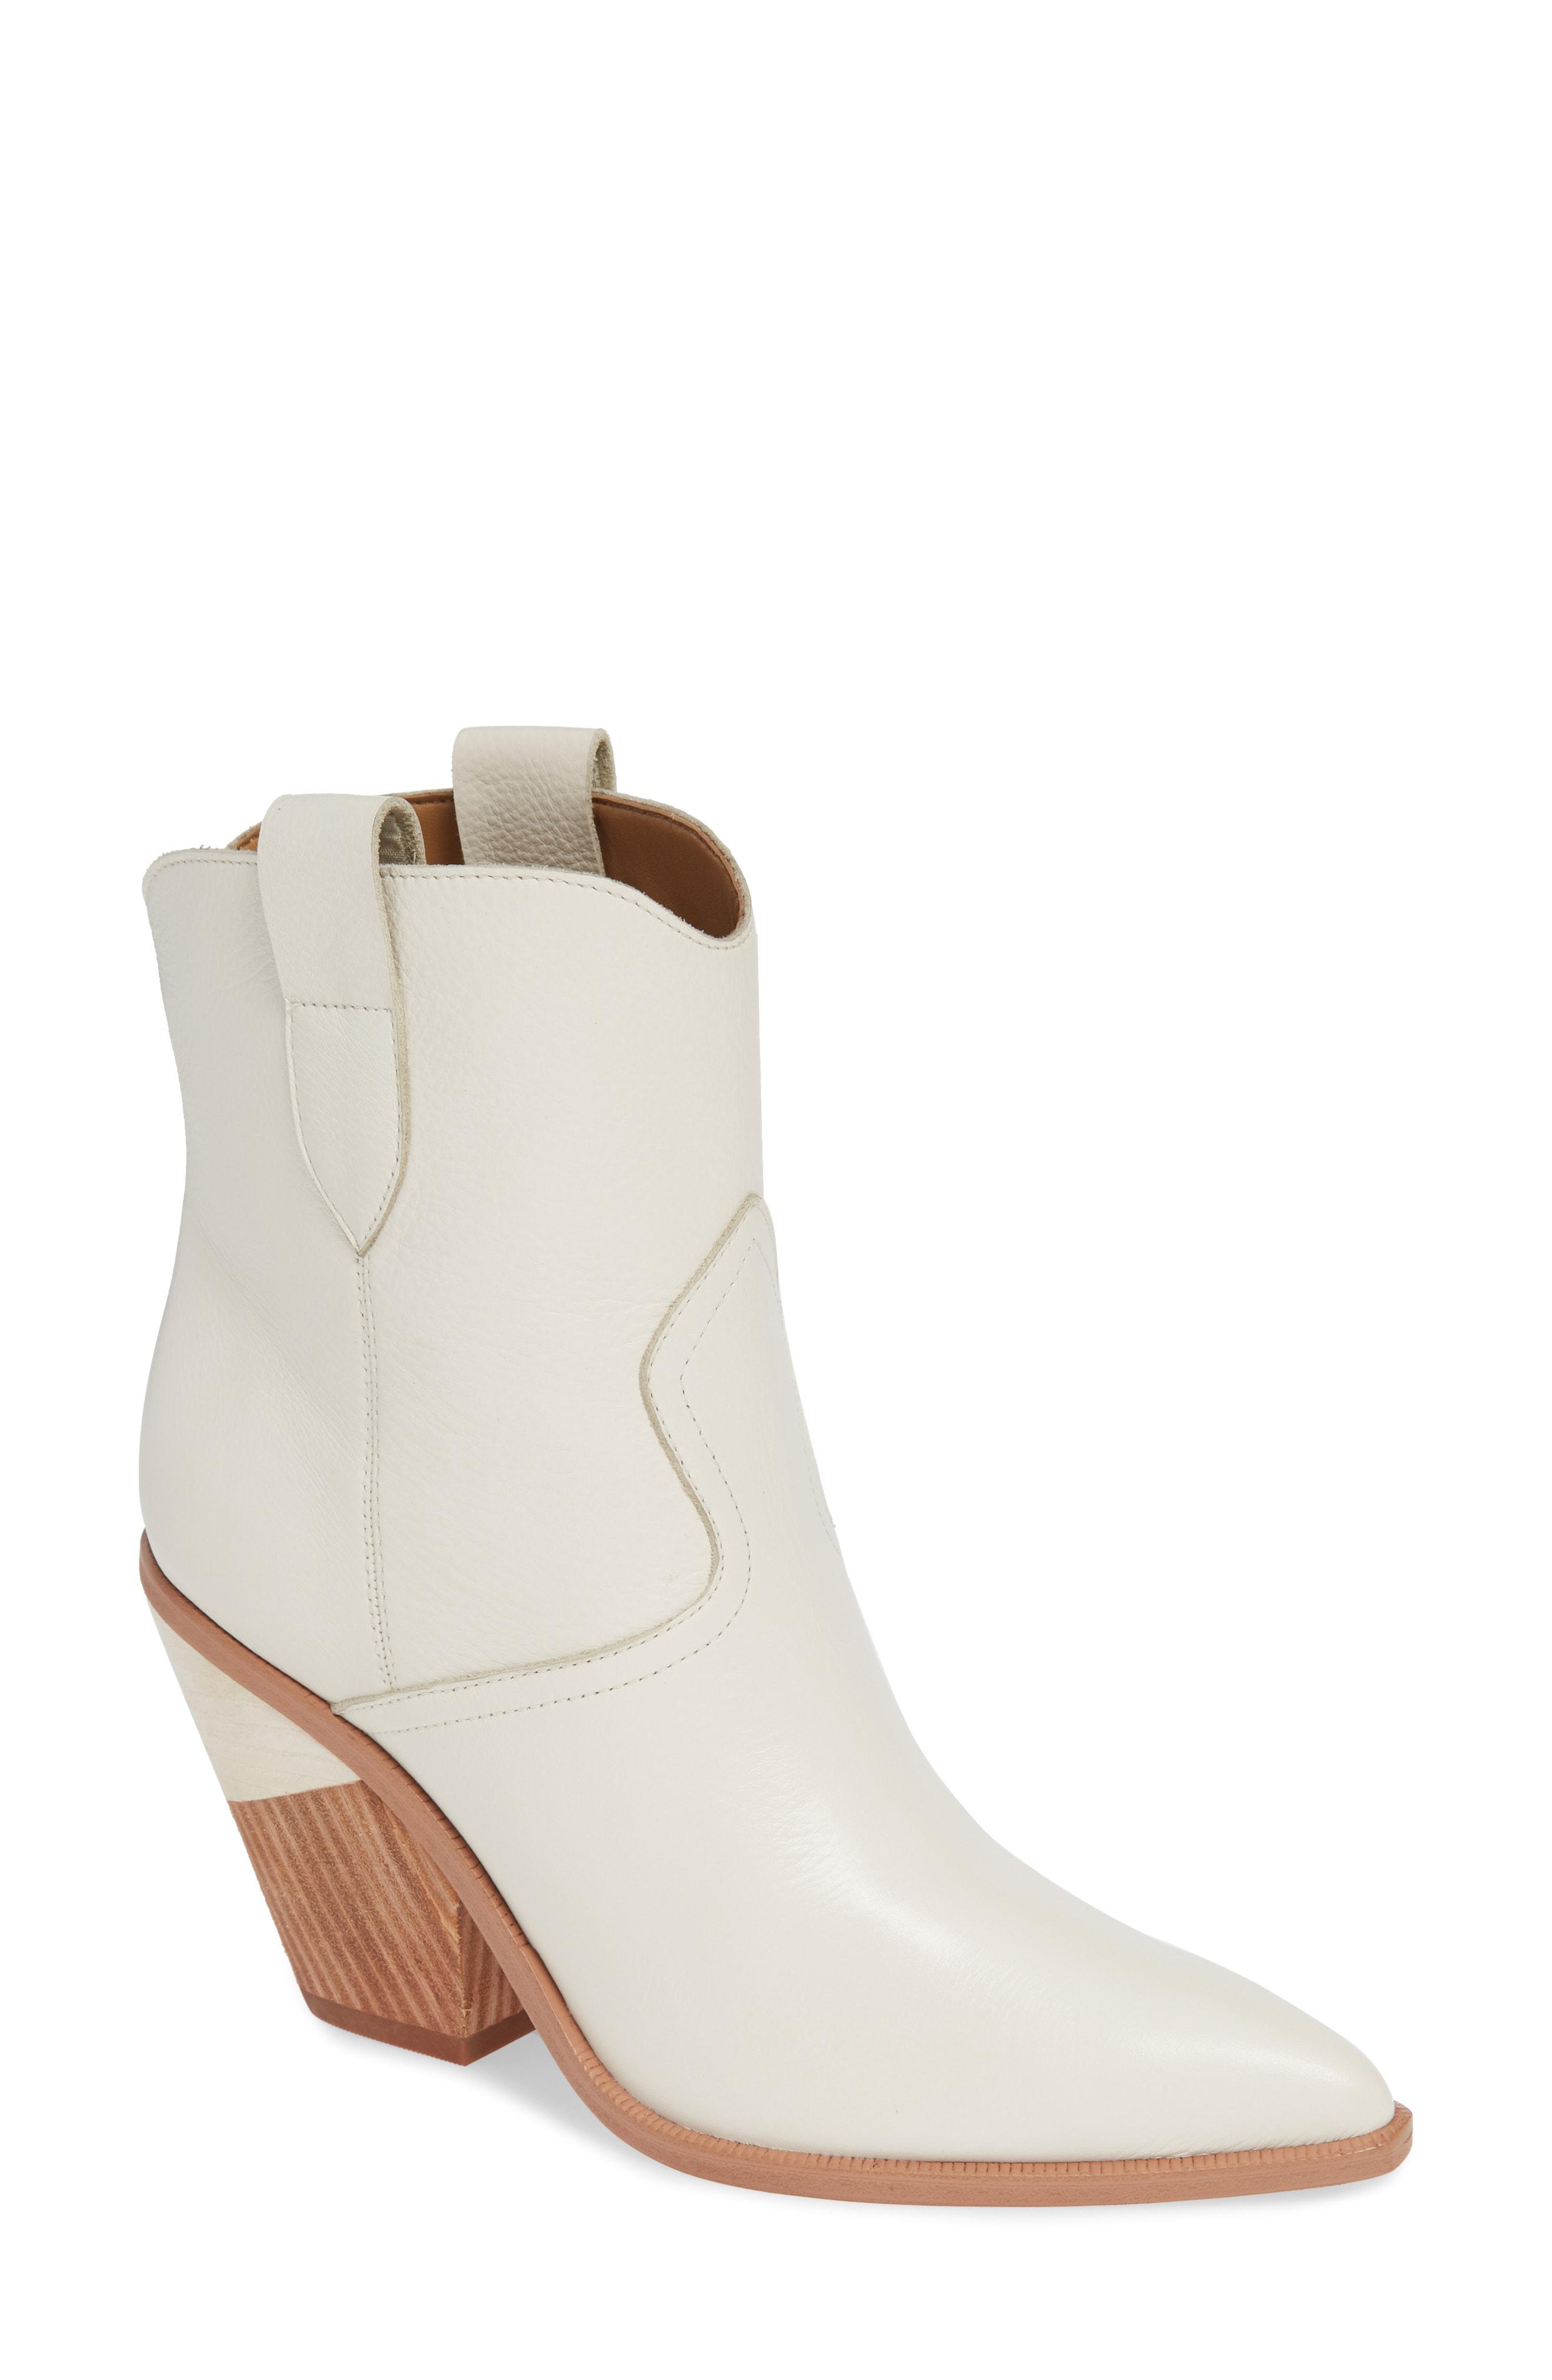 marc fisher white ankle boots